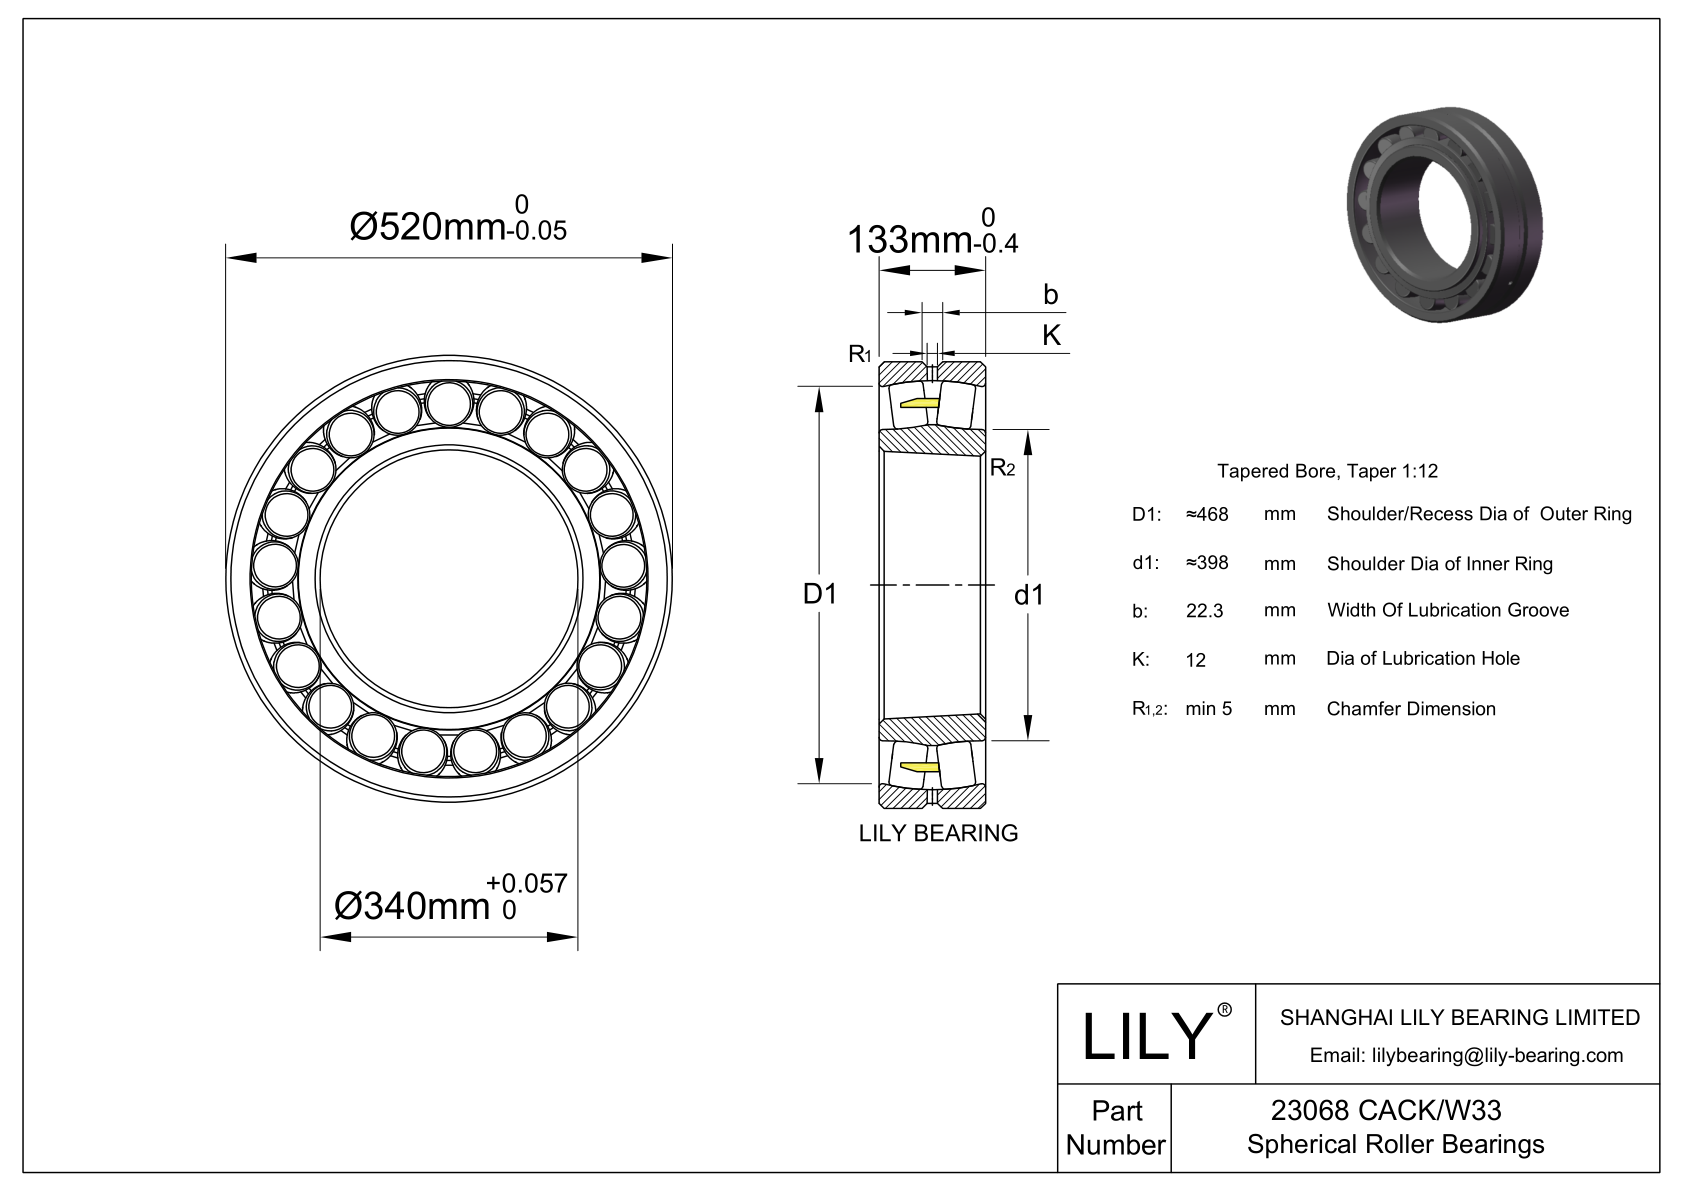 23068 CACK/W33 Double Row Spherical Roller Bearing cad drawing